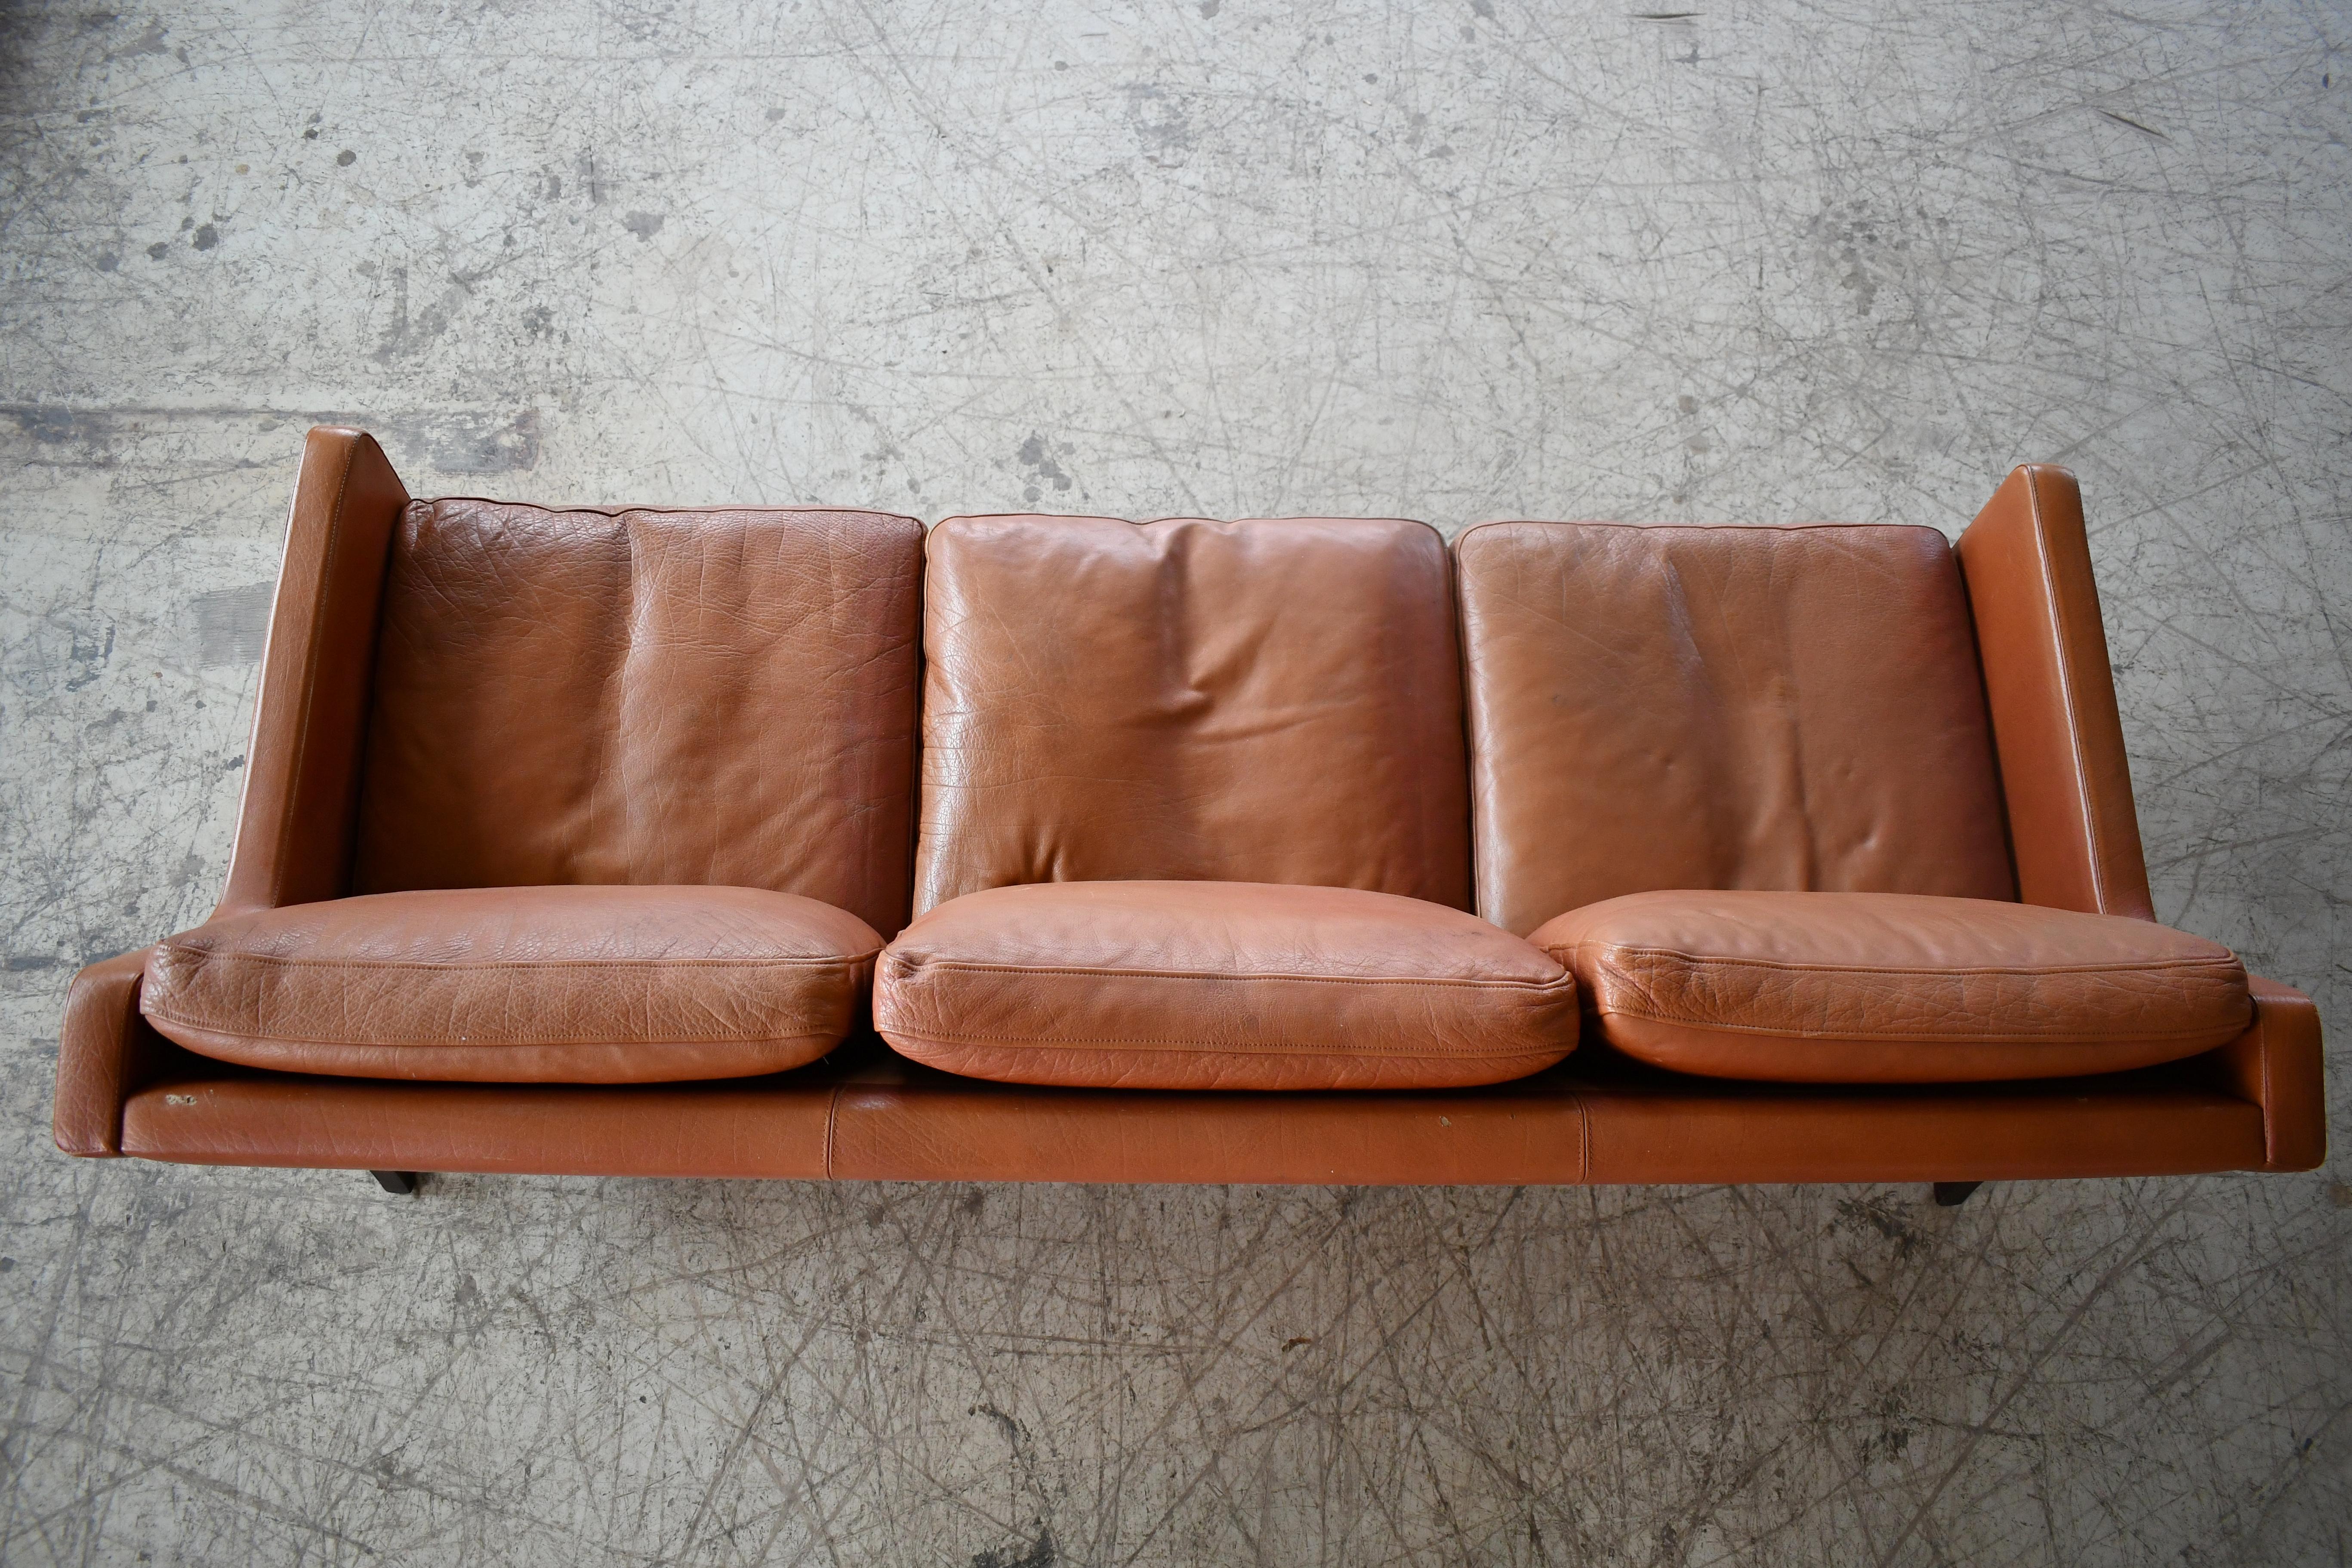 Late 20th Century Børge Mogensen Style Three-Seat Sofa in Cognac Leather by Georg Thams, Denmark For Sale